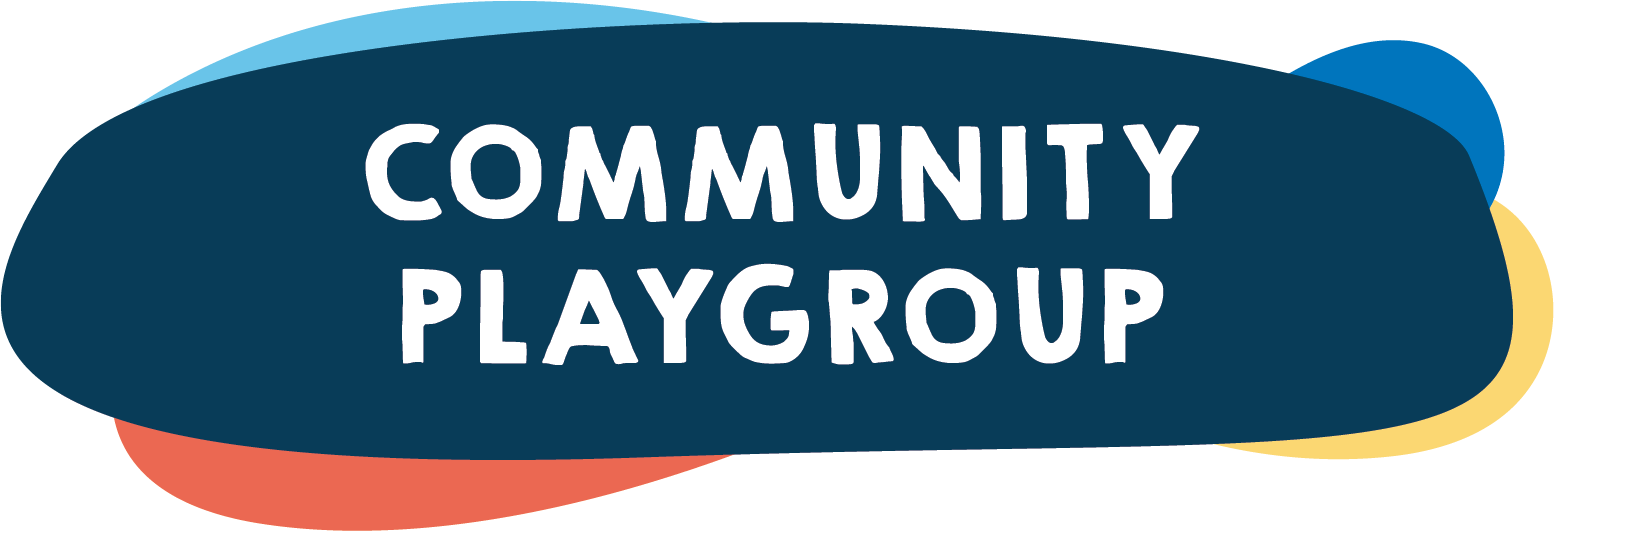 Pre-Kinder (BCC Beginners), community playgroup